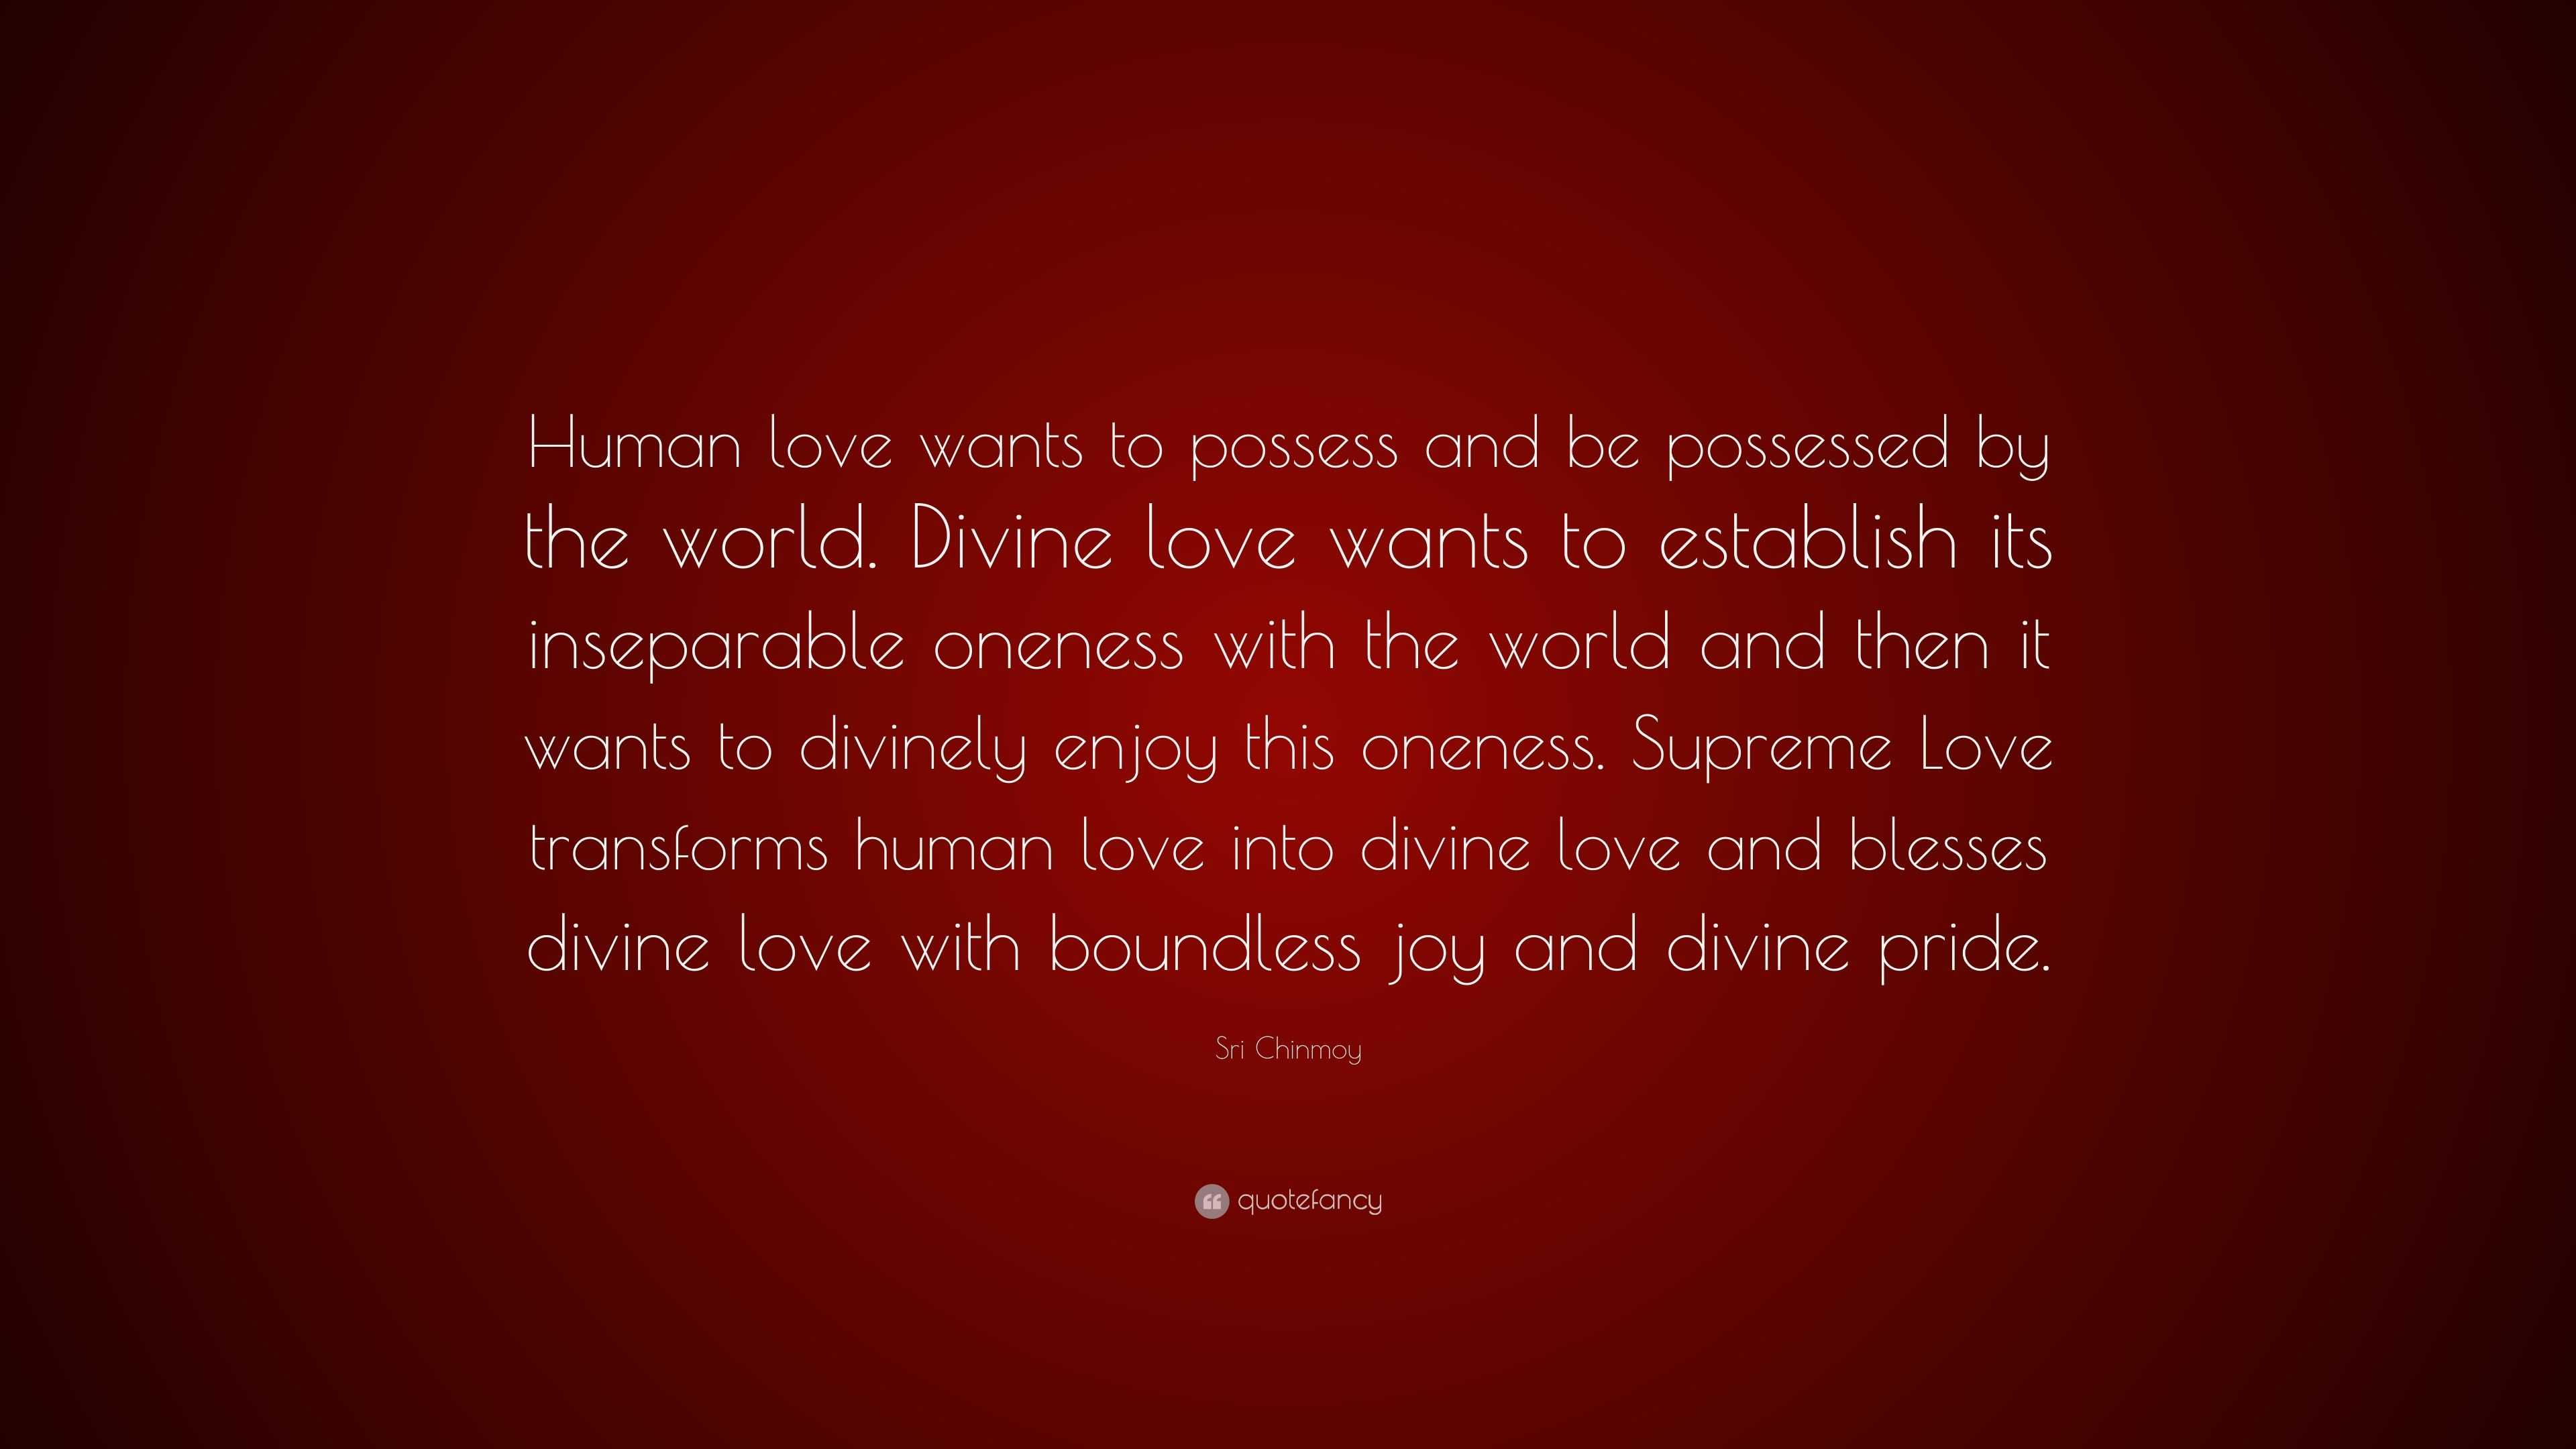 Sri Chinmoy Quote: “Human love wants to possess and be possessed by the  world. Divine love wants to establish its inseparable oneness with t”